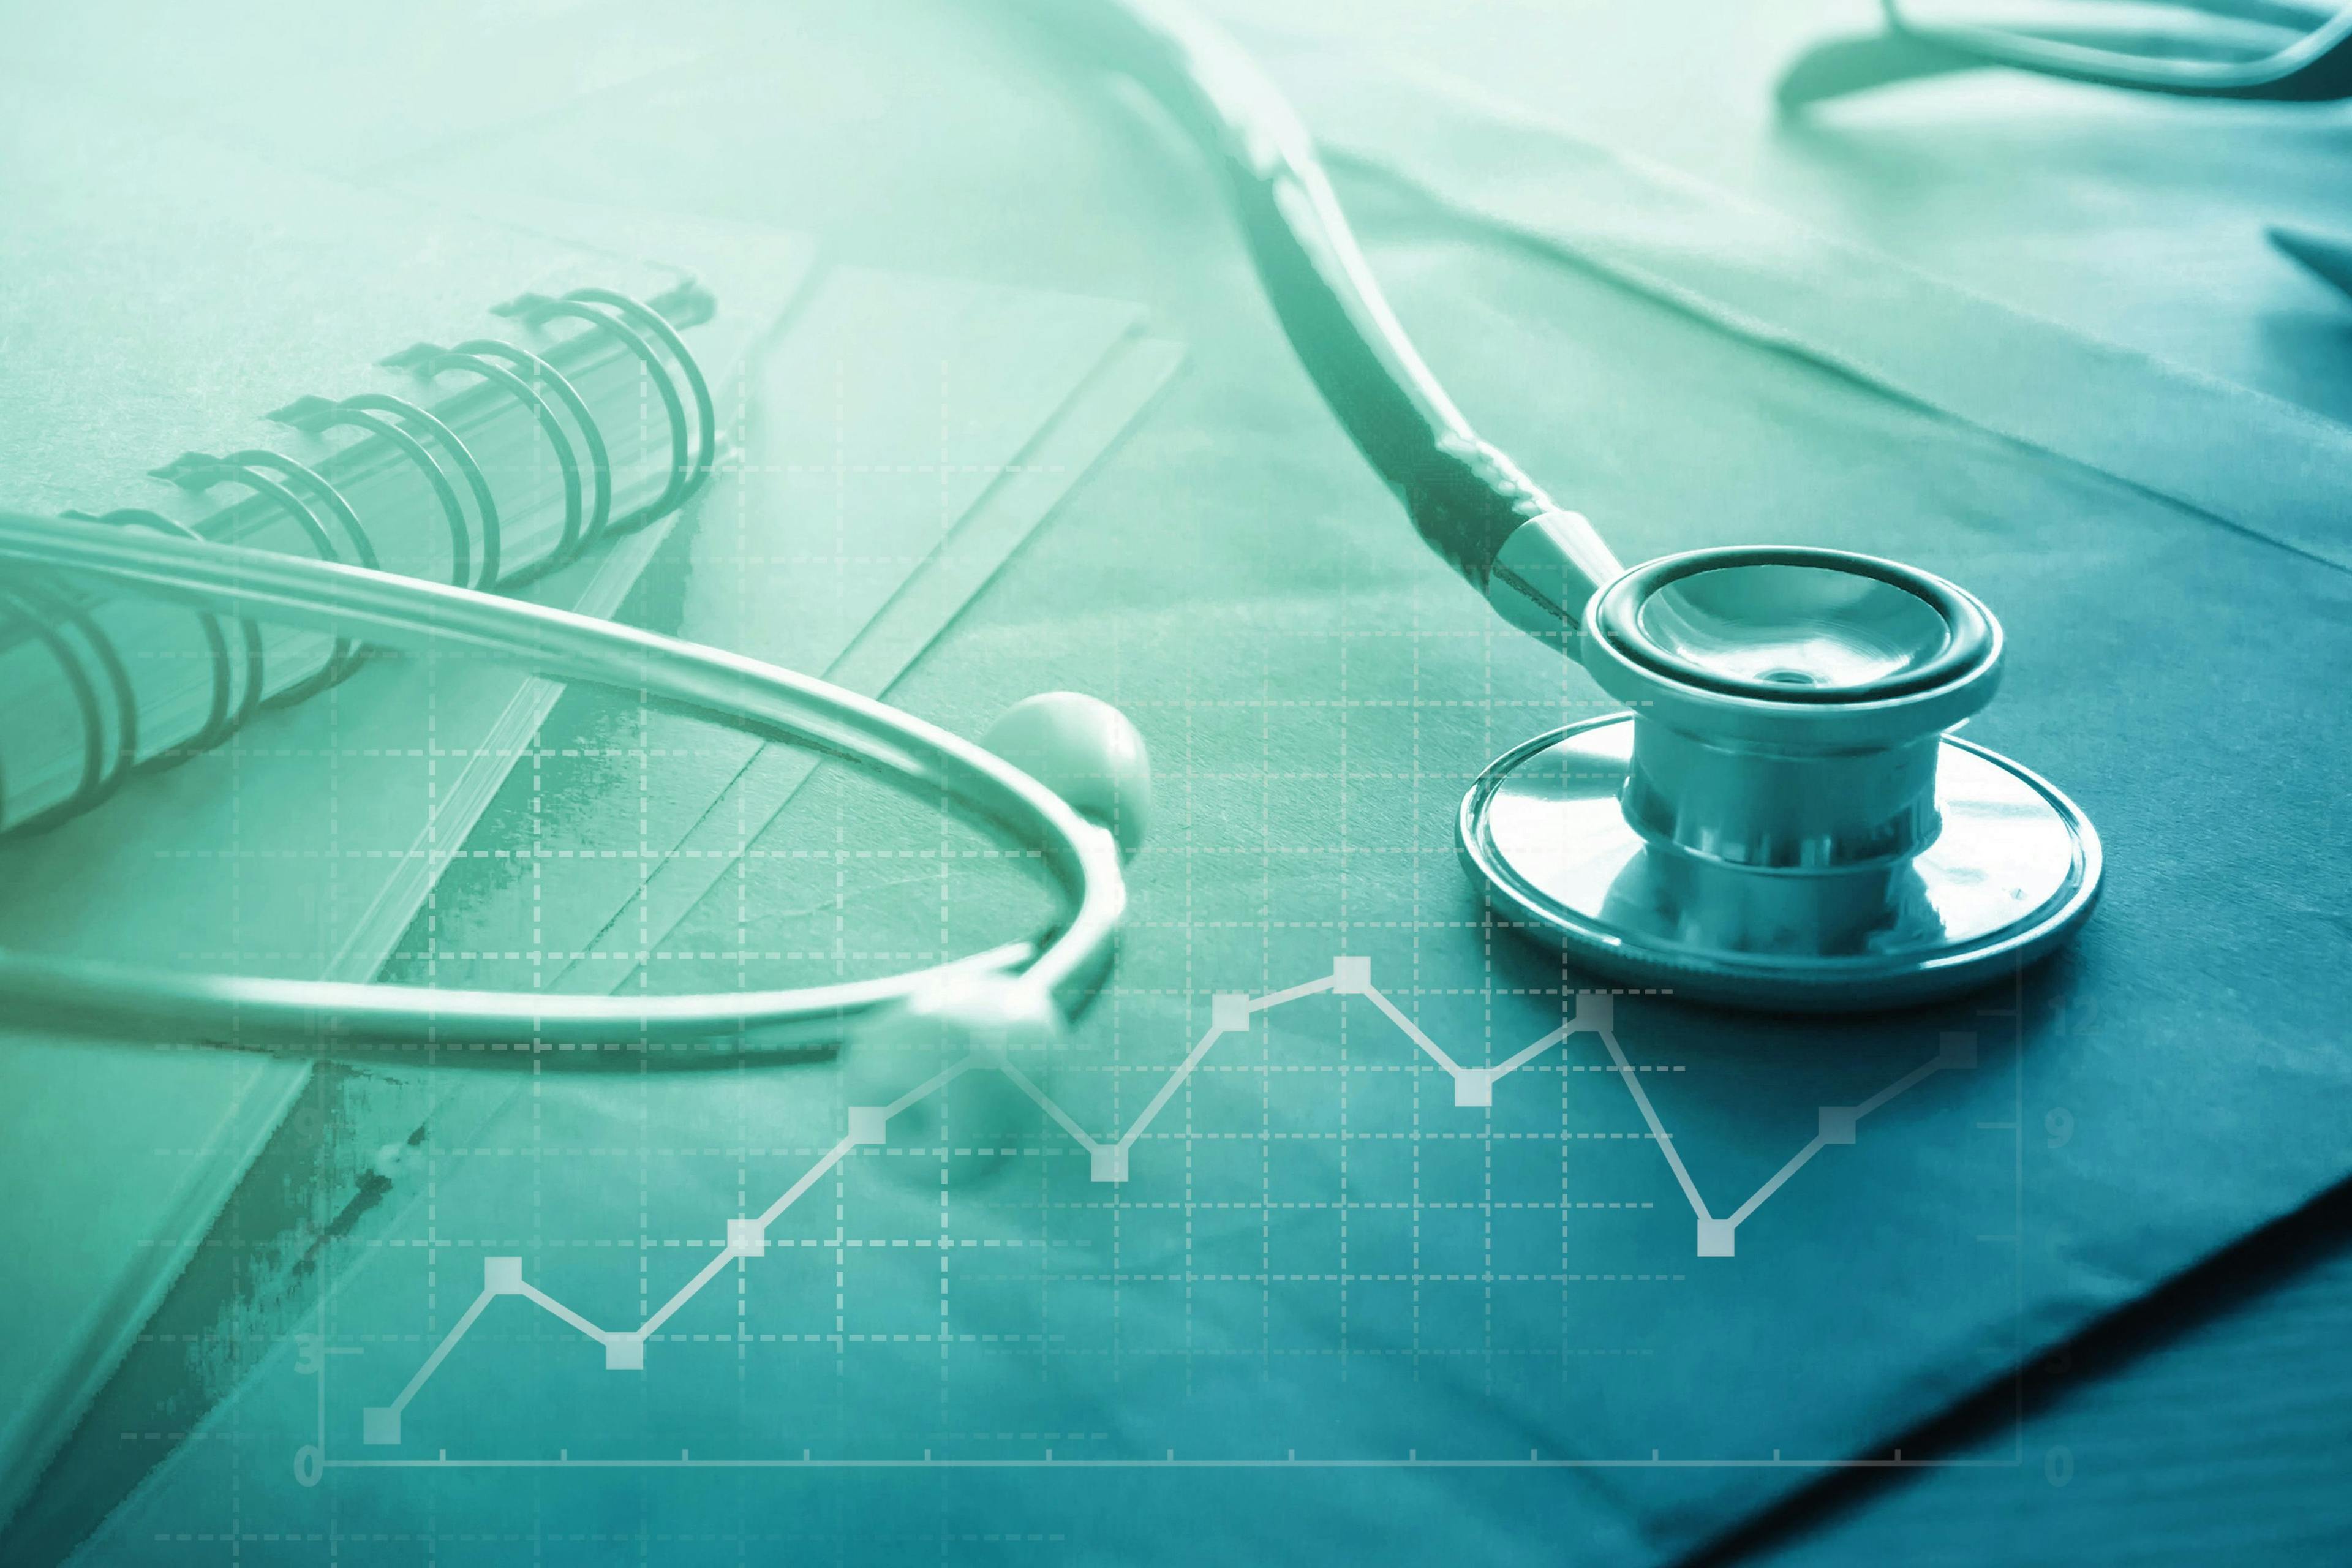 Advanced Health Care Technology Solutions Can Help Both Providers and Payers